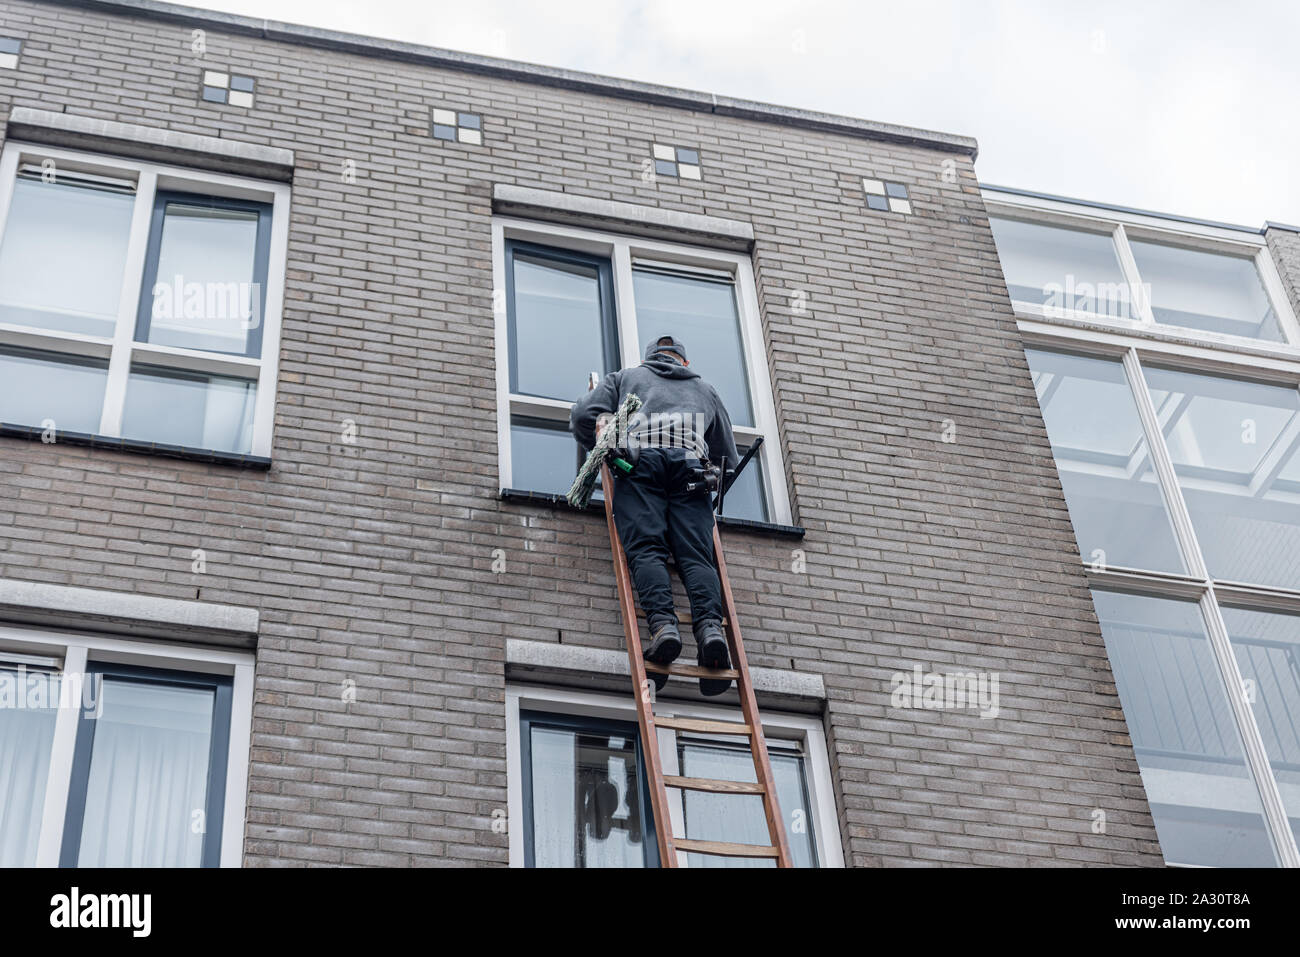 Window cleaner on a ladder cleaning the windows high against a building of brick walls. Stock Photo